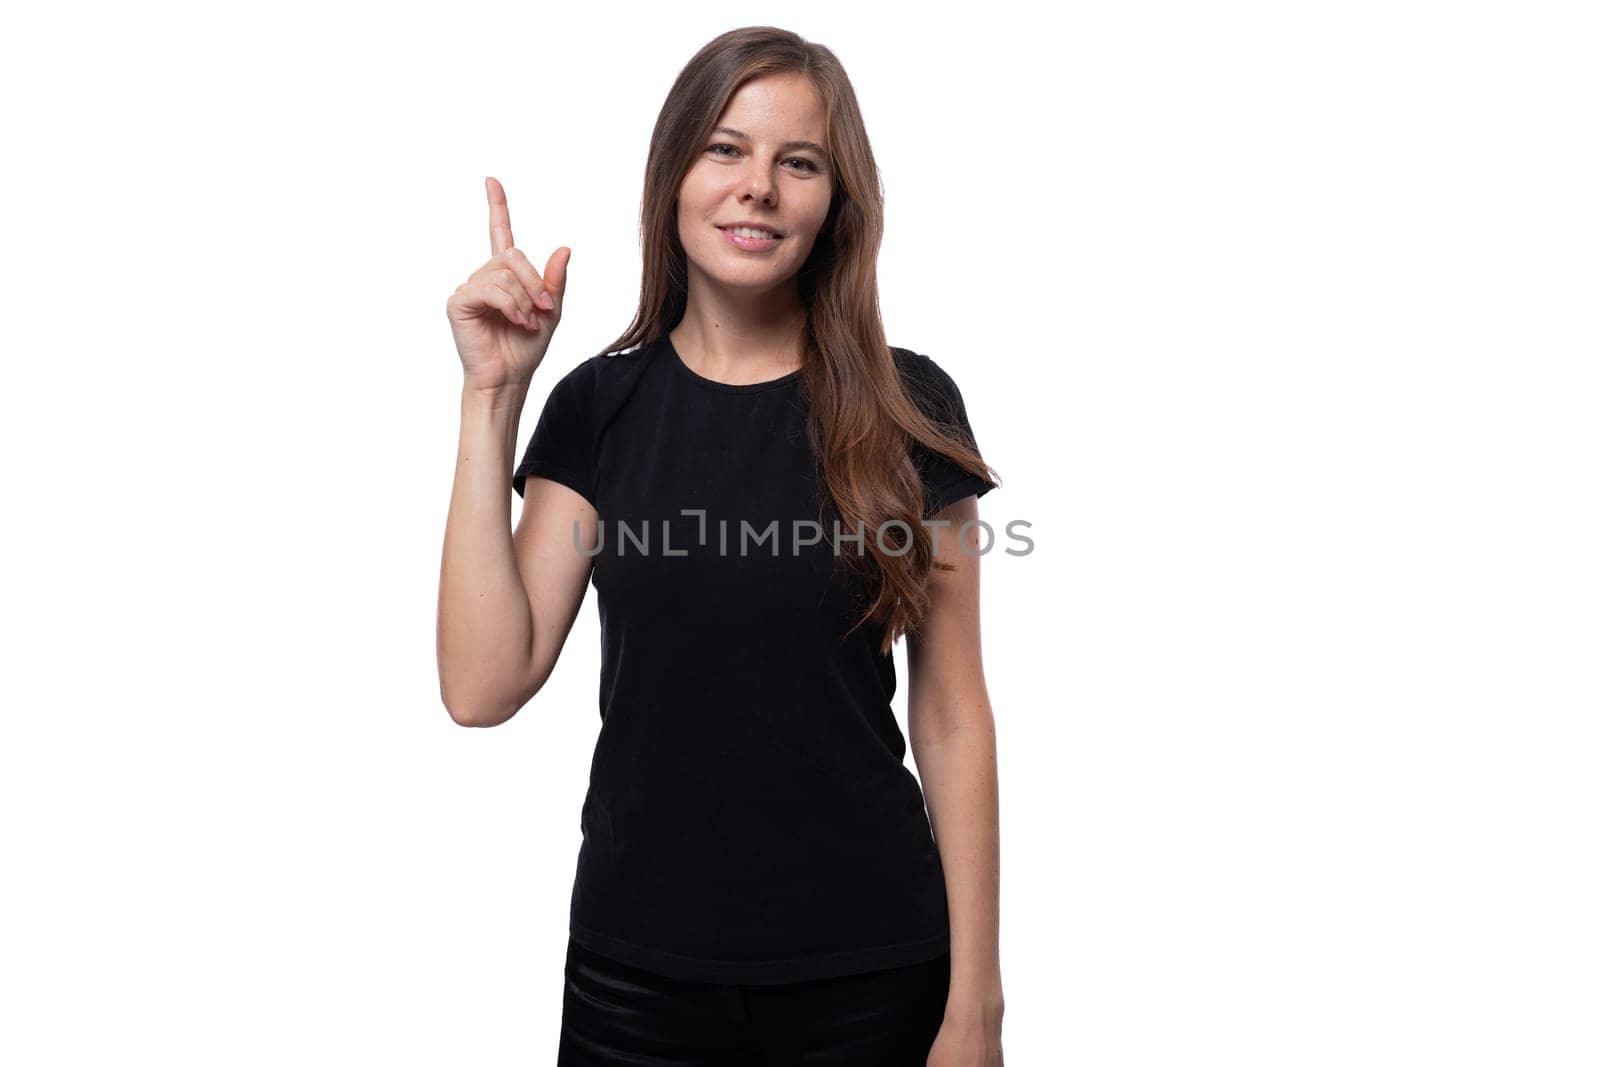 Portrait of a young well-groomed woman dressed in a basic T-shirt by TRMK